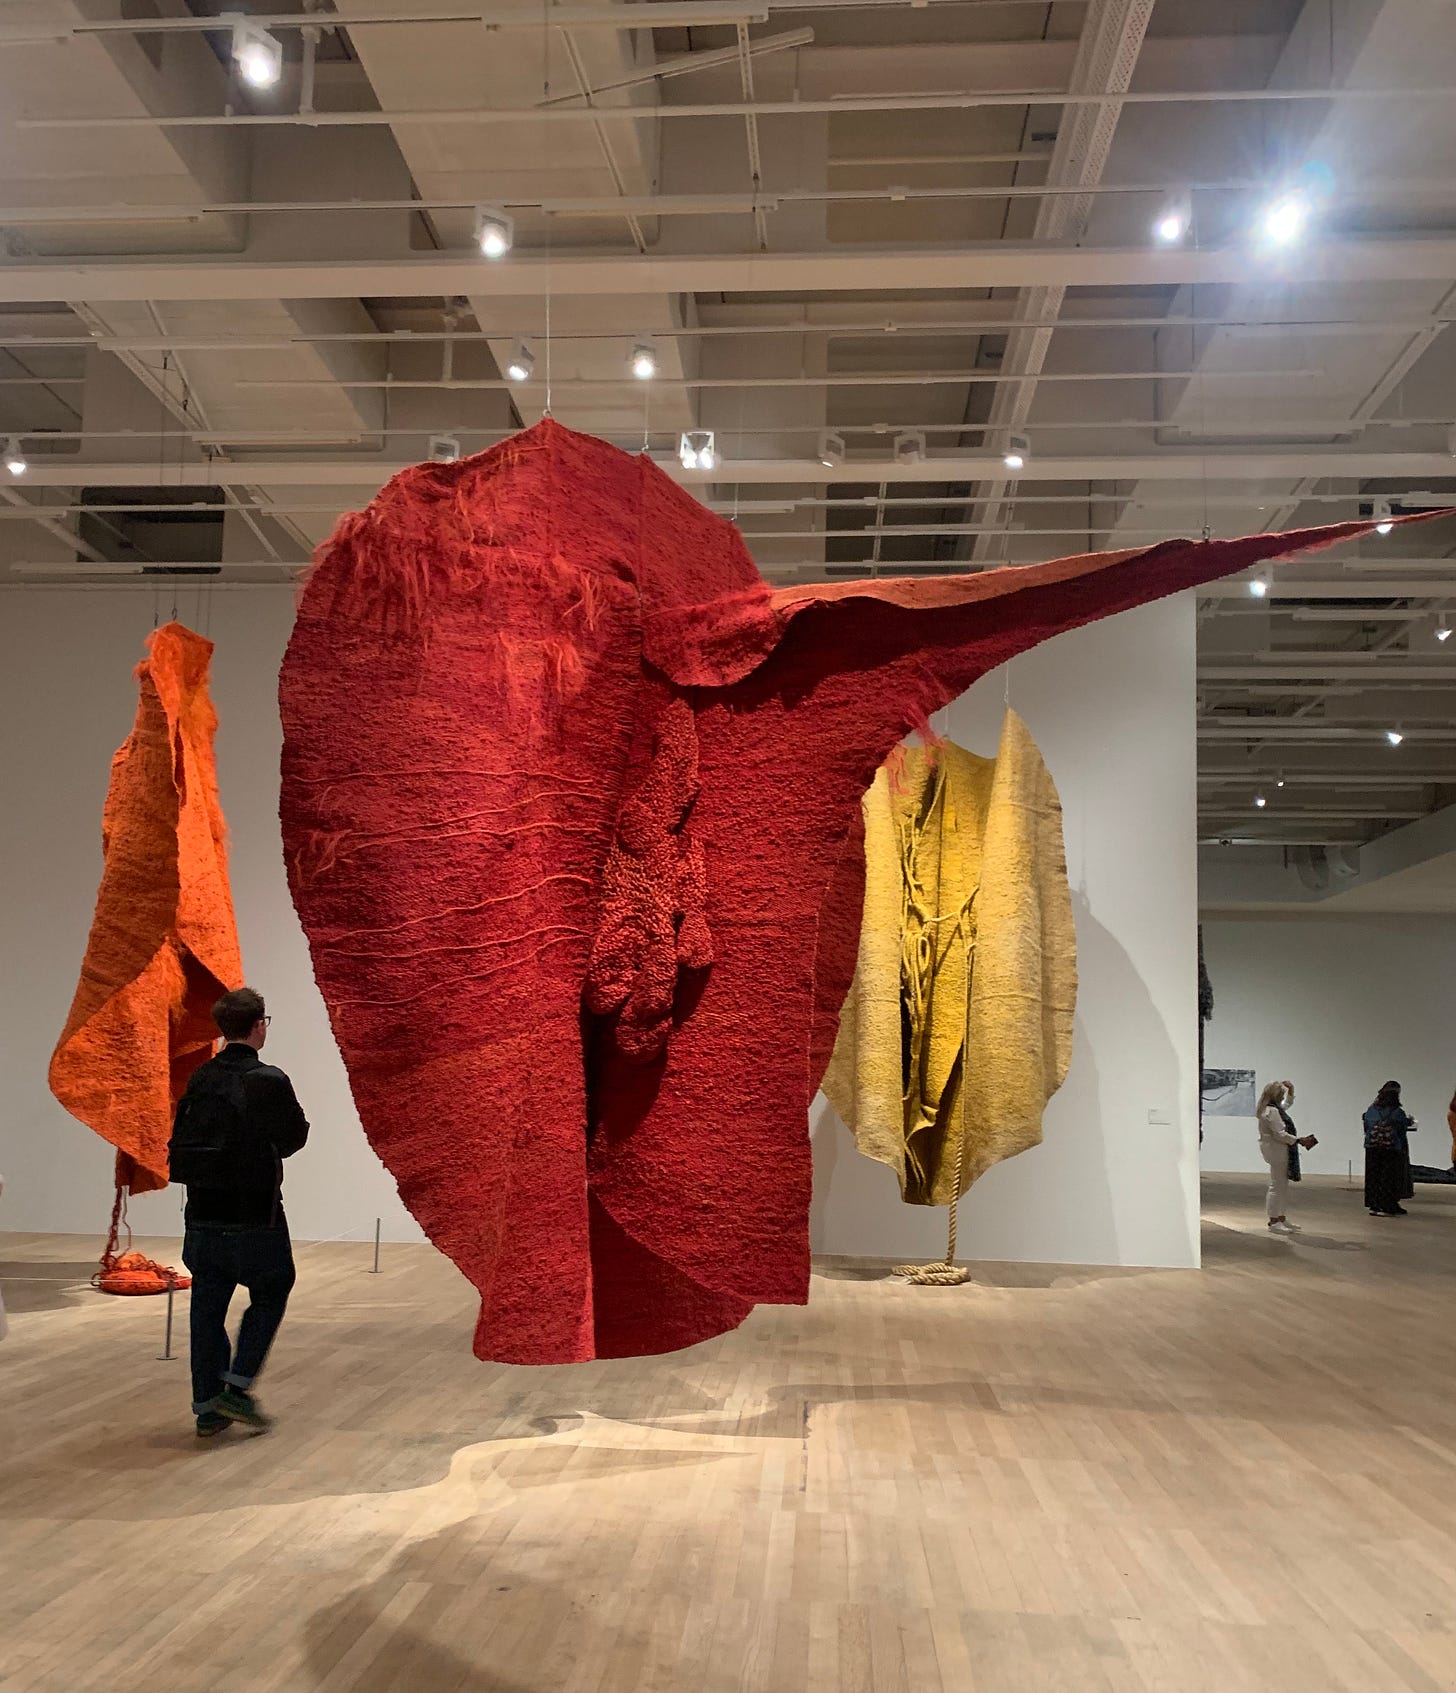 Three large fabric sculptures, one orange one red and one yellow suspended from the ceiling in an art gallery